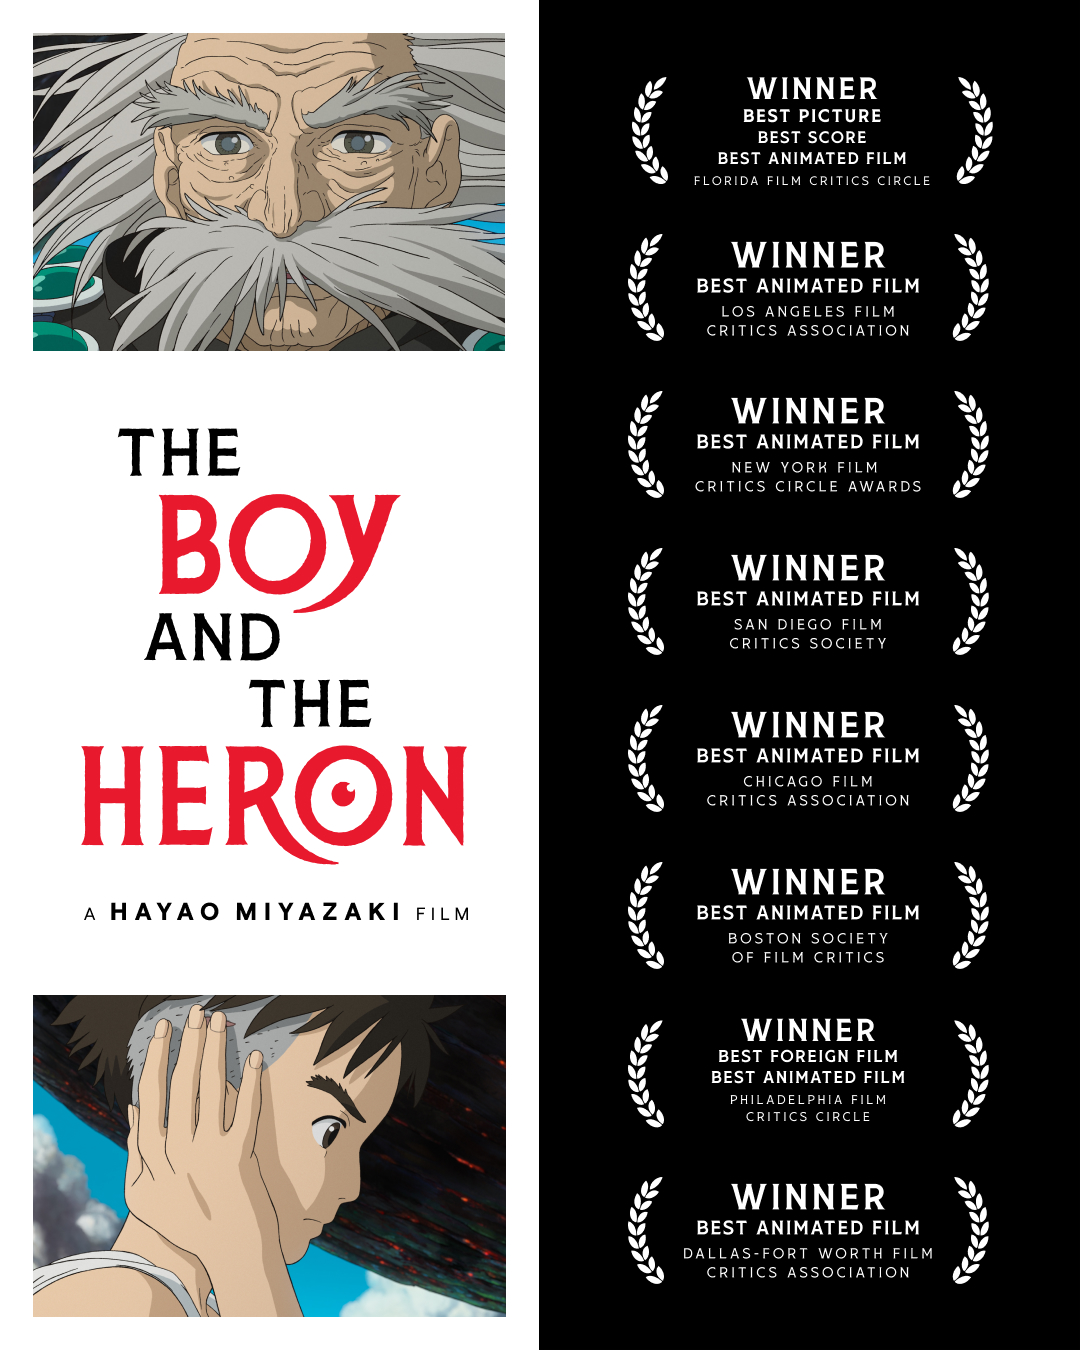 The Boy and The Heron awards